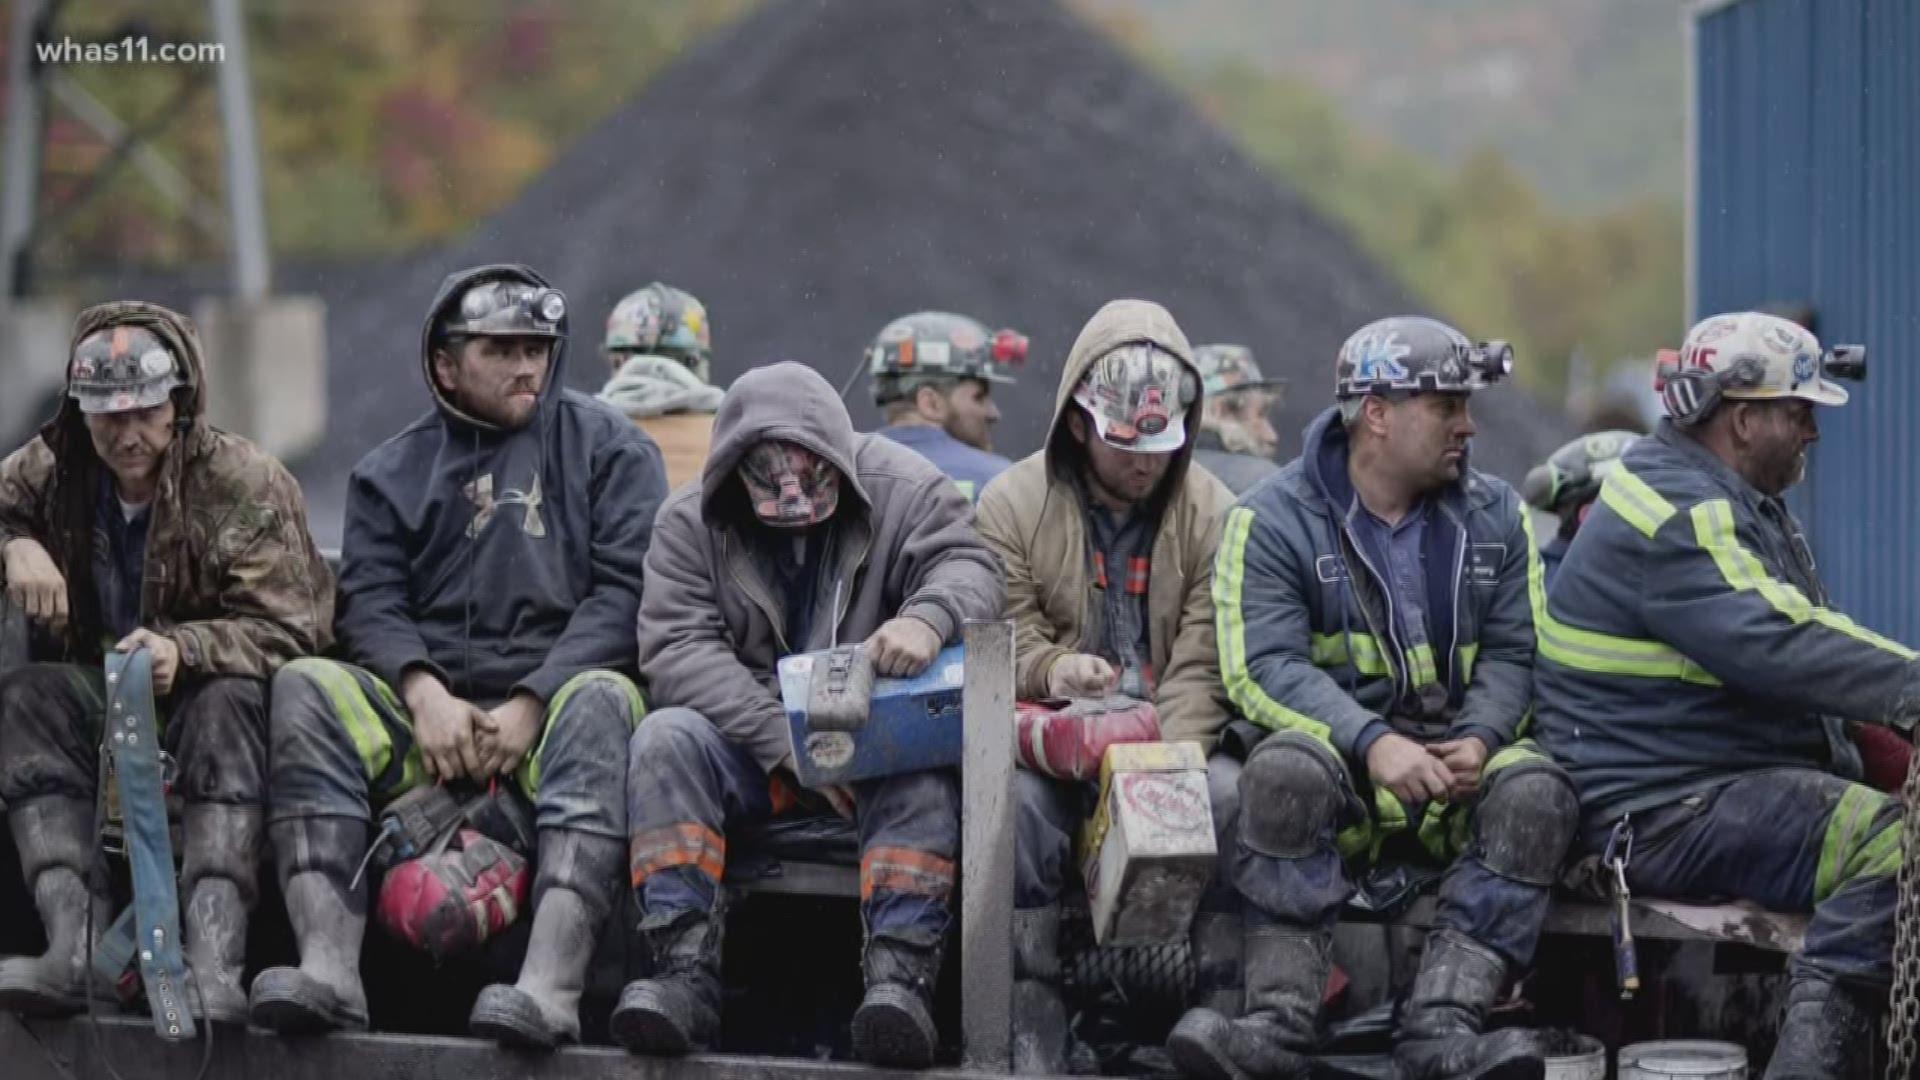 Senate Majority Leader Mitch McConnell says he's secured pension benefits for Kentucky miners in what's called the "Bipartisan American Miners Act of 2019".